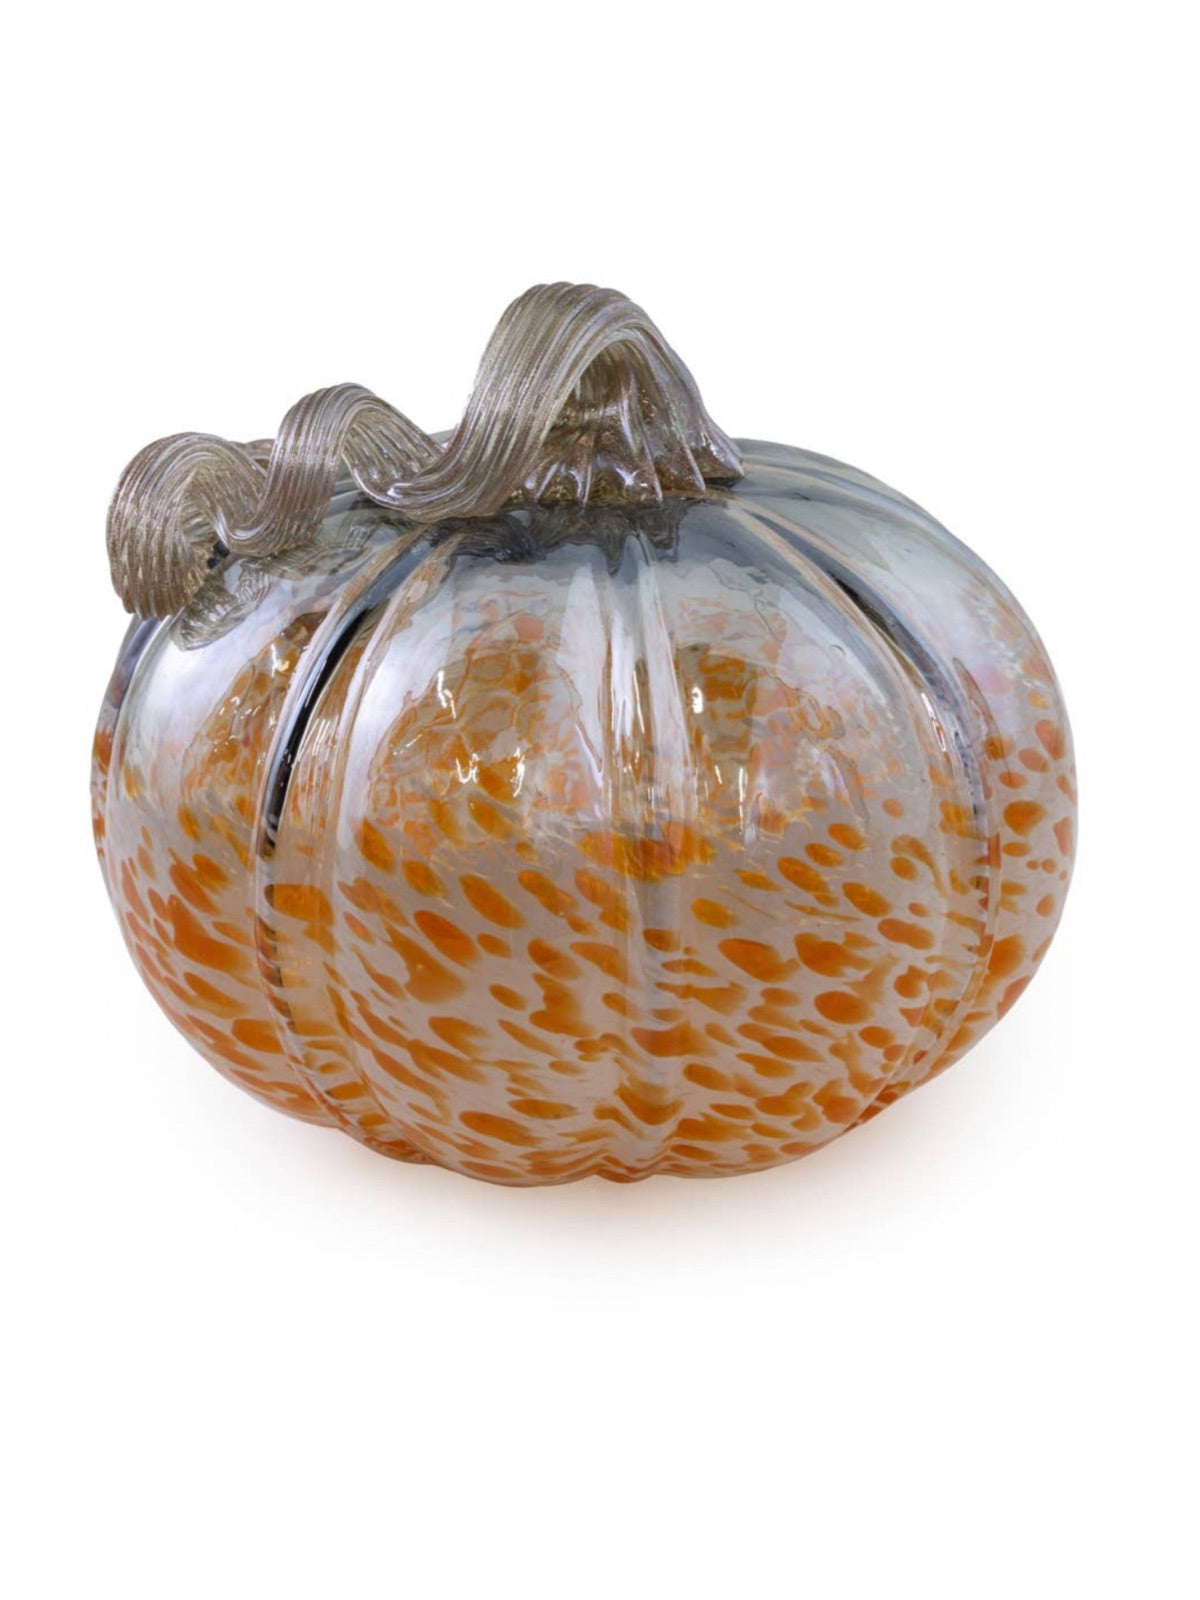 Bring charming seasonal style to your decor with this Decorative Pumpkin. This hand-blown glass pumpkin features a twisted stem on top and colorful orange spots on grey glass for eye-catching seasonal appeal in your home.